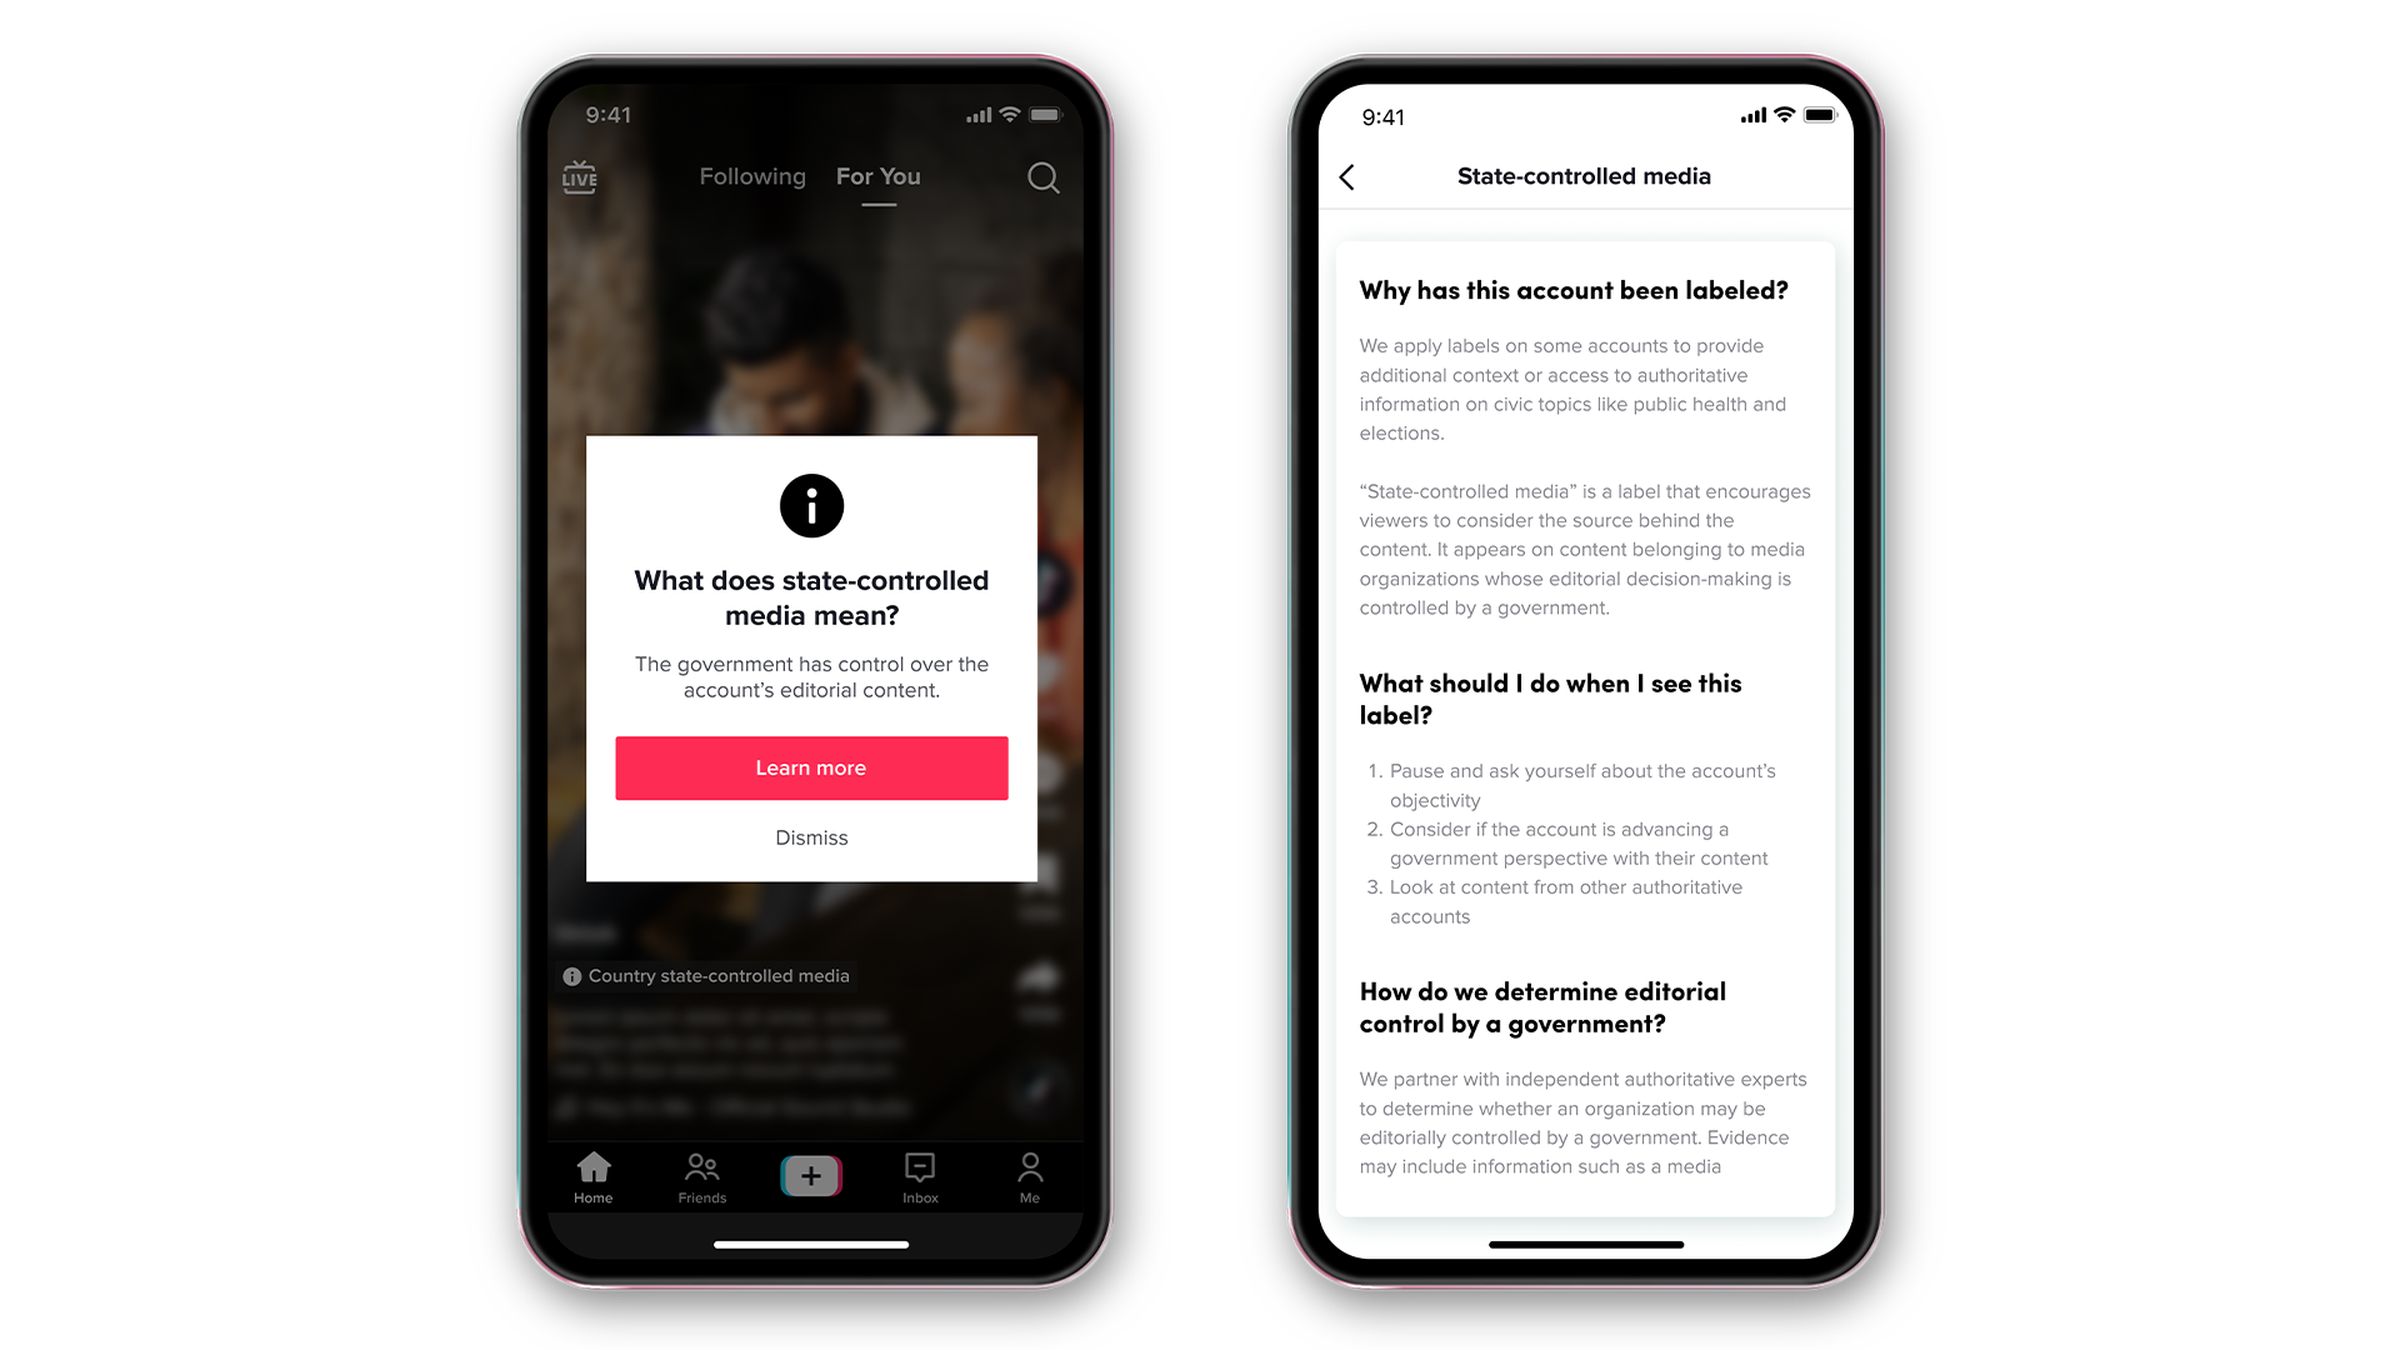 A TikTok app displaying a state-controlled media pop-up with frequently asked questions about the label.